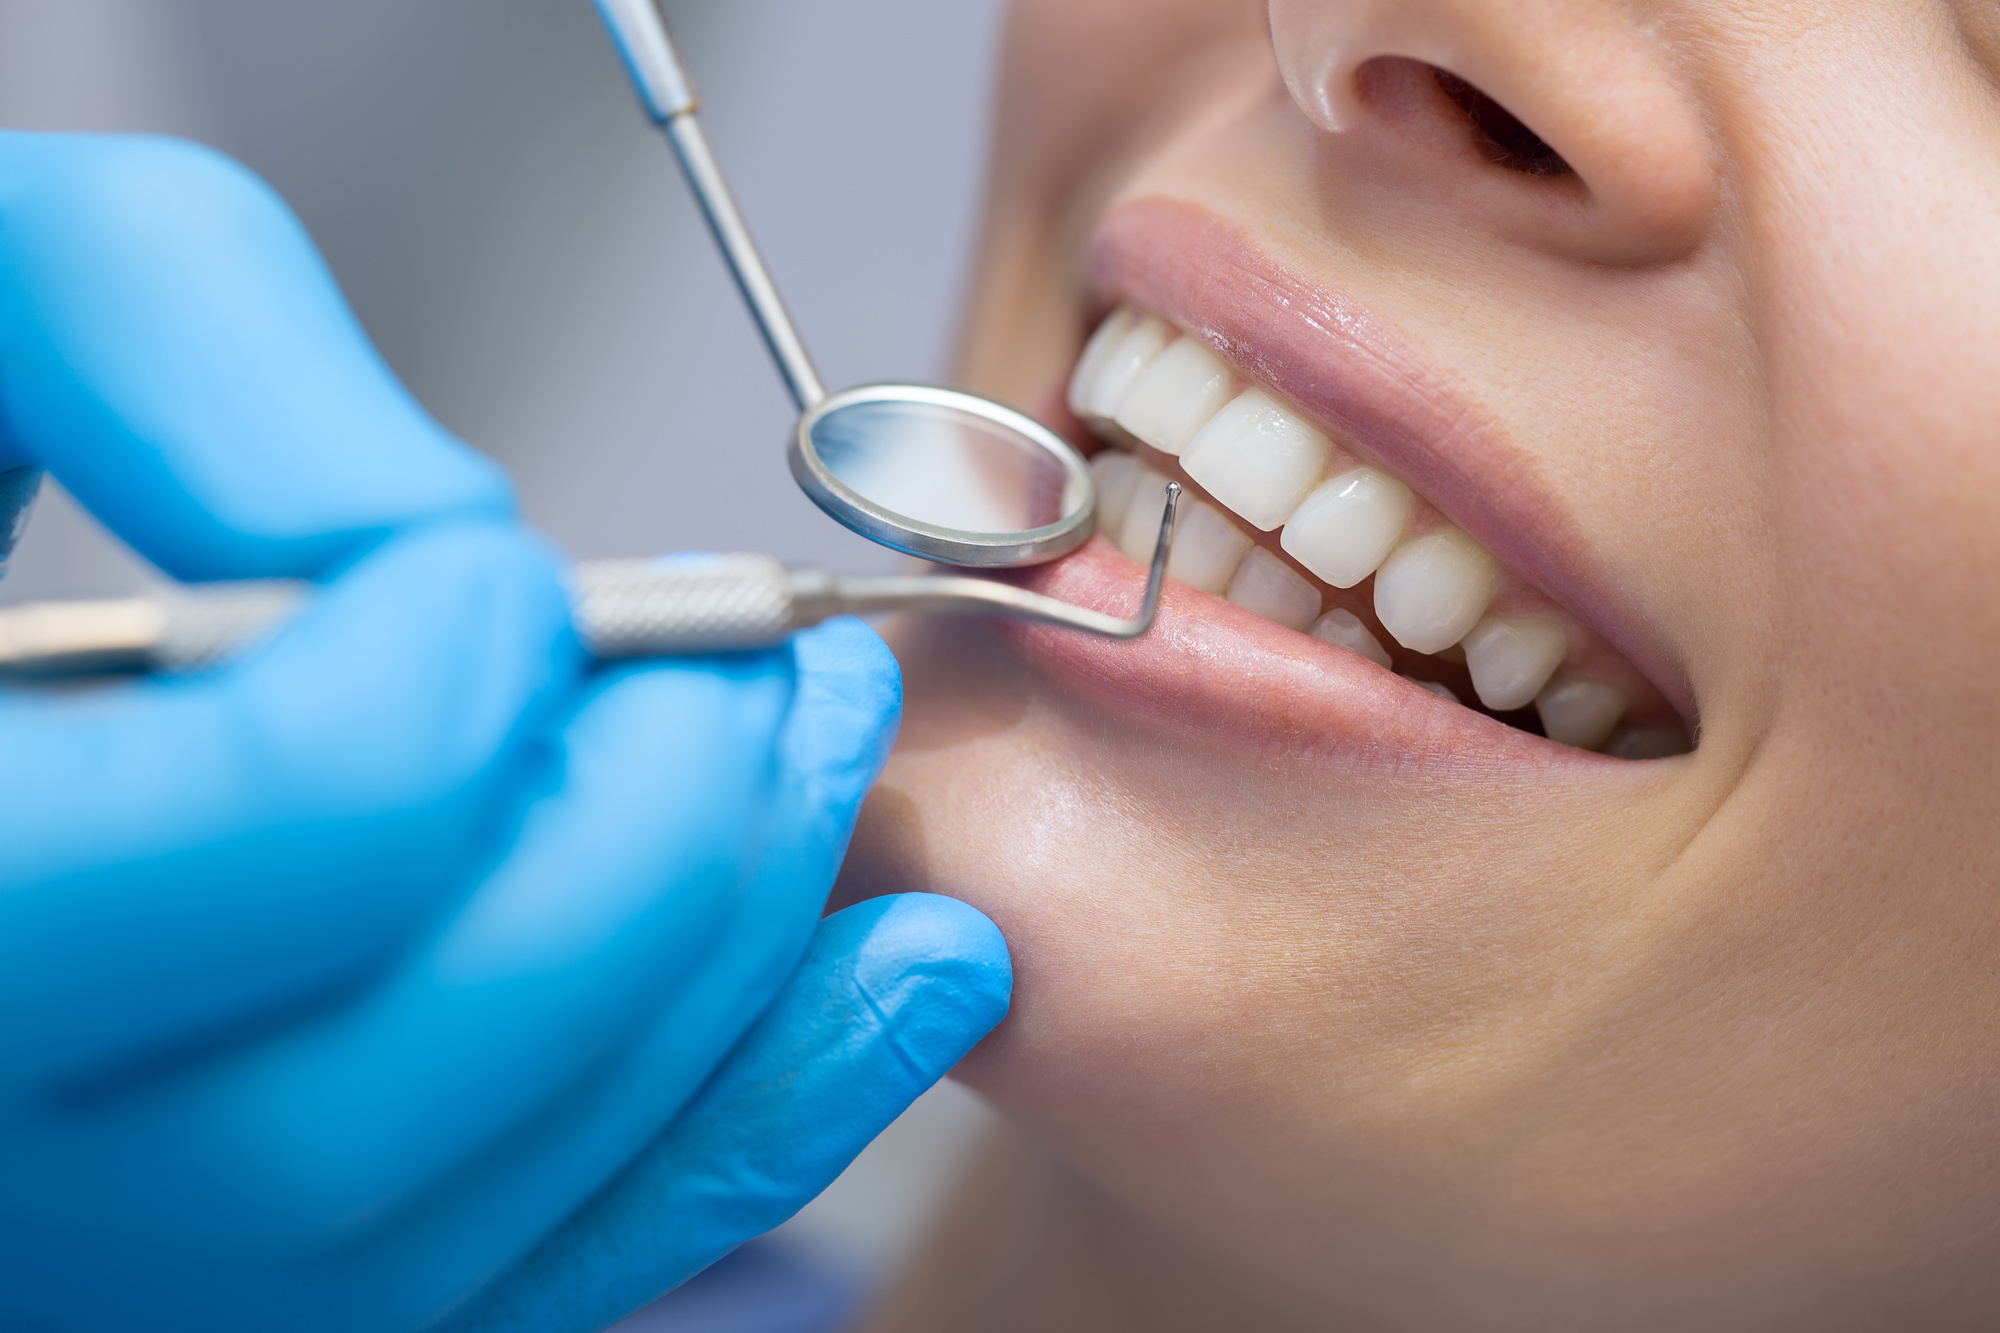 Cosmetic Dentistry Treatments